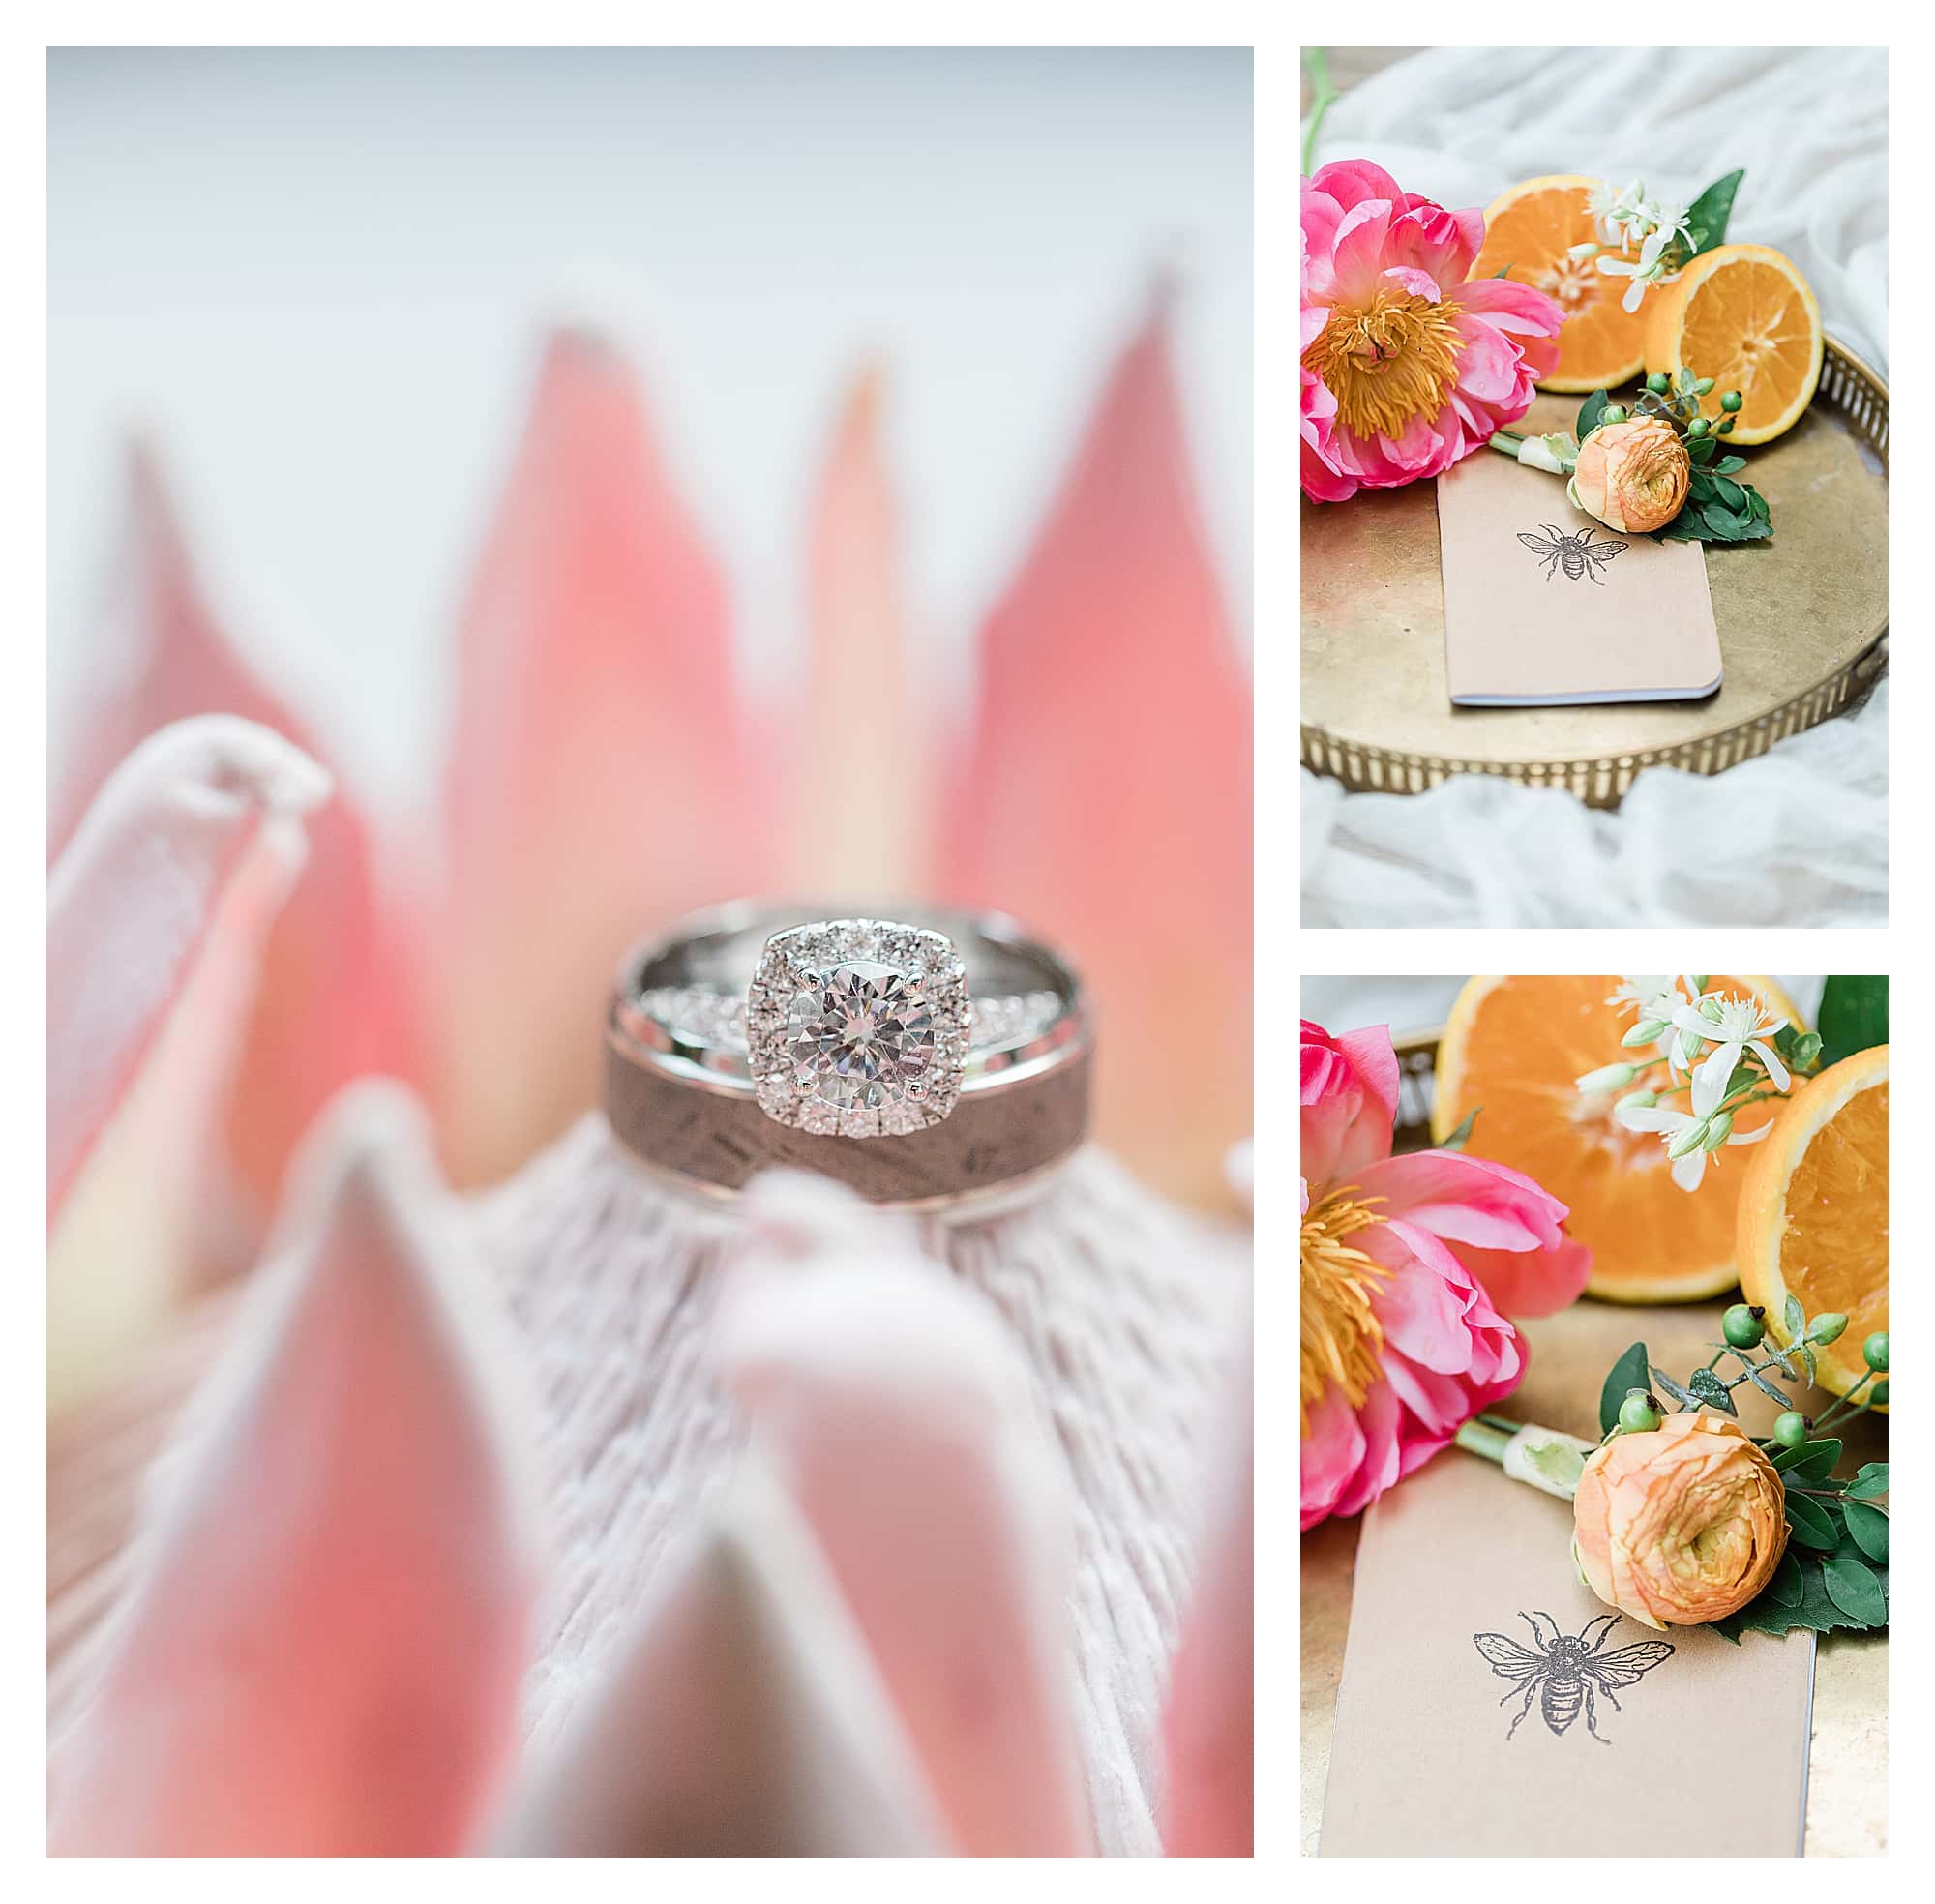 Wedding rings on flower and peach wedding boutonniere